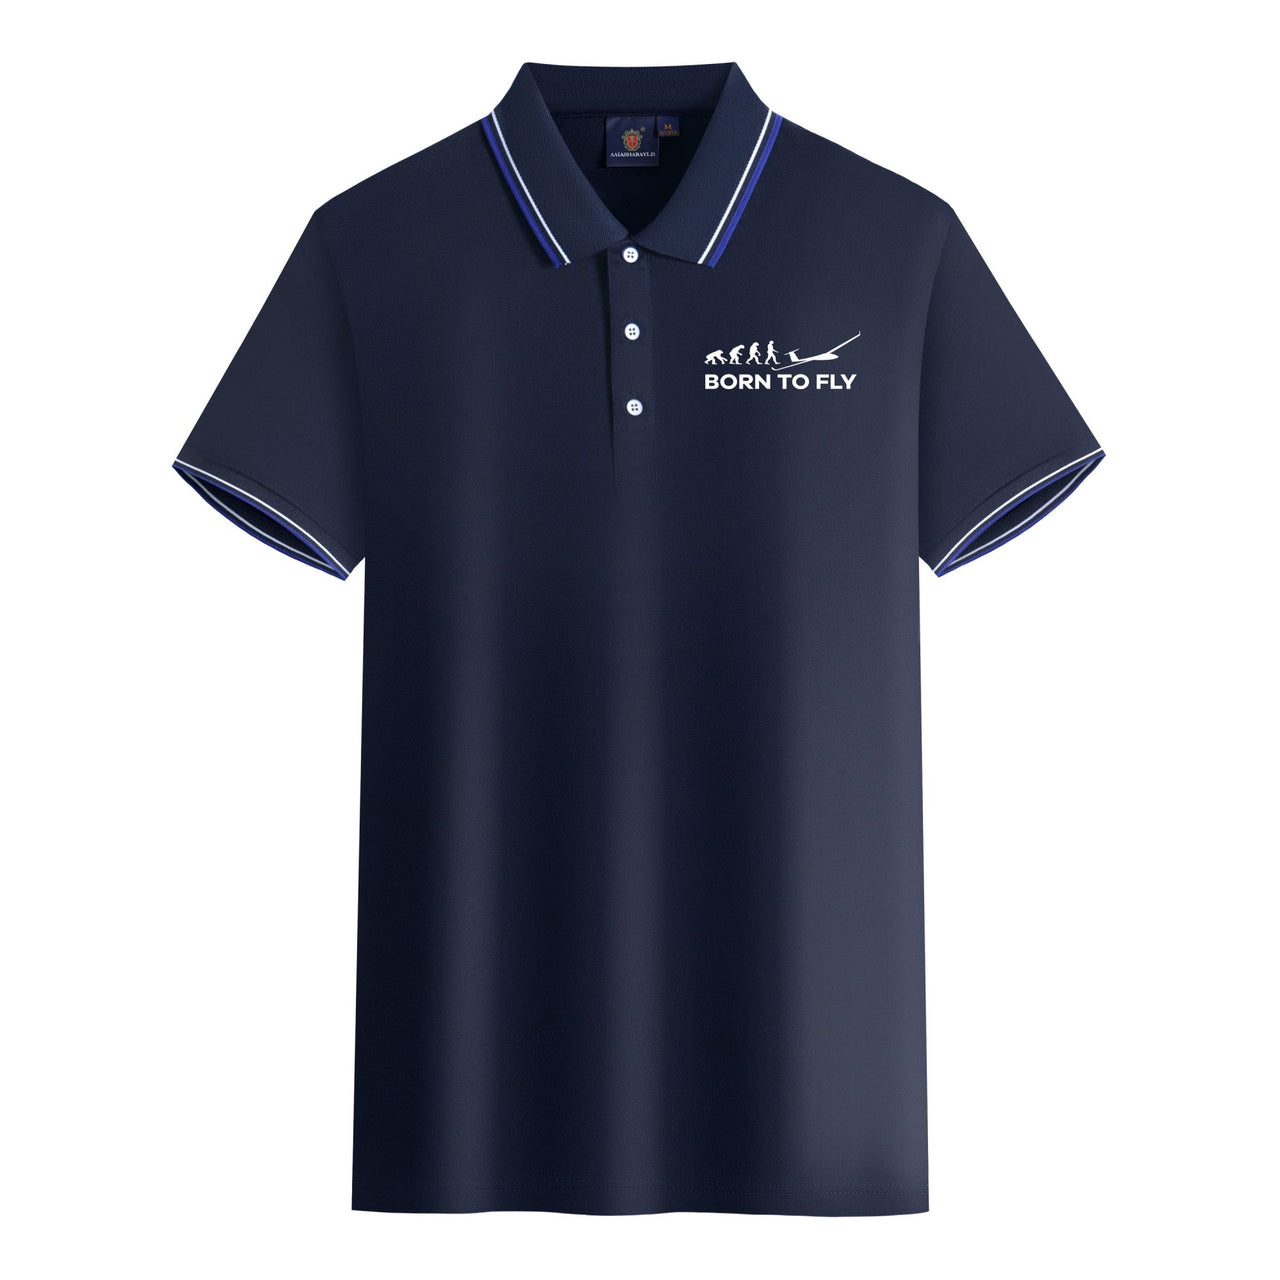 Born To Fly Glider Designed Stylish Polo T-Shirts